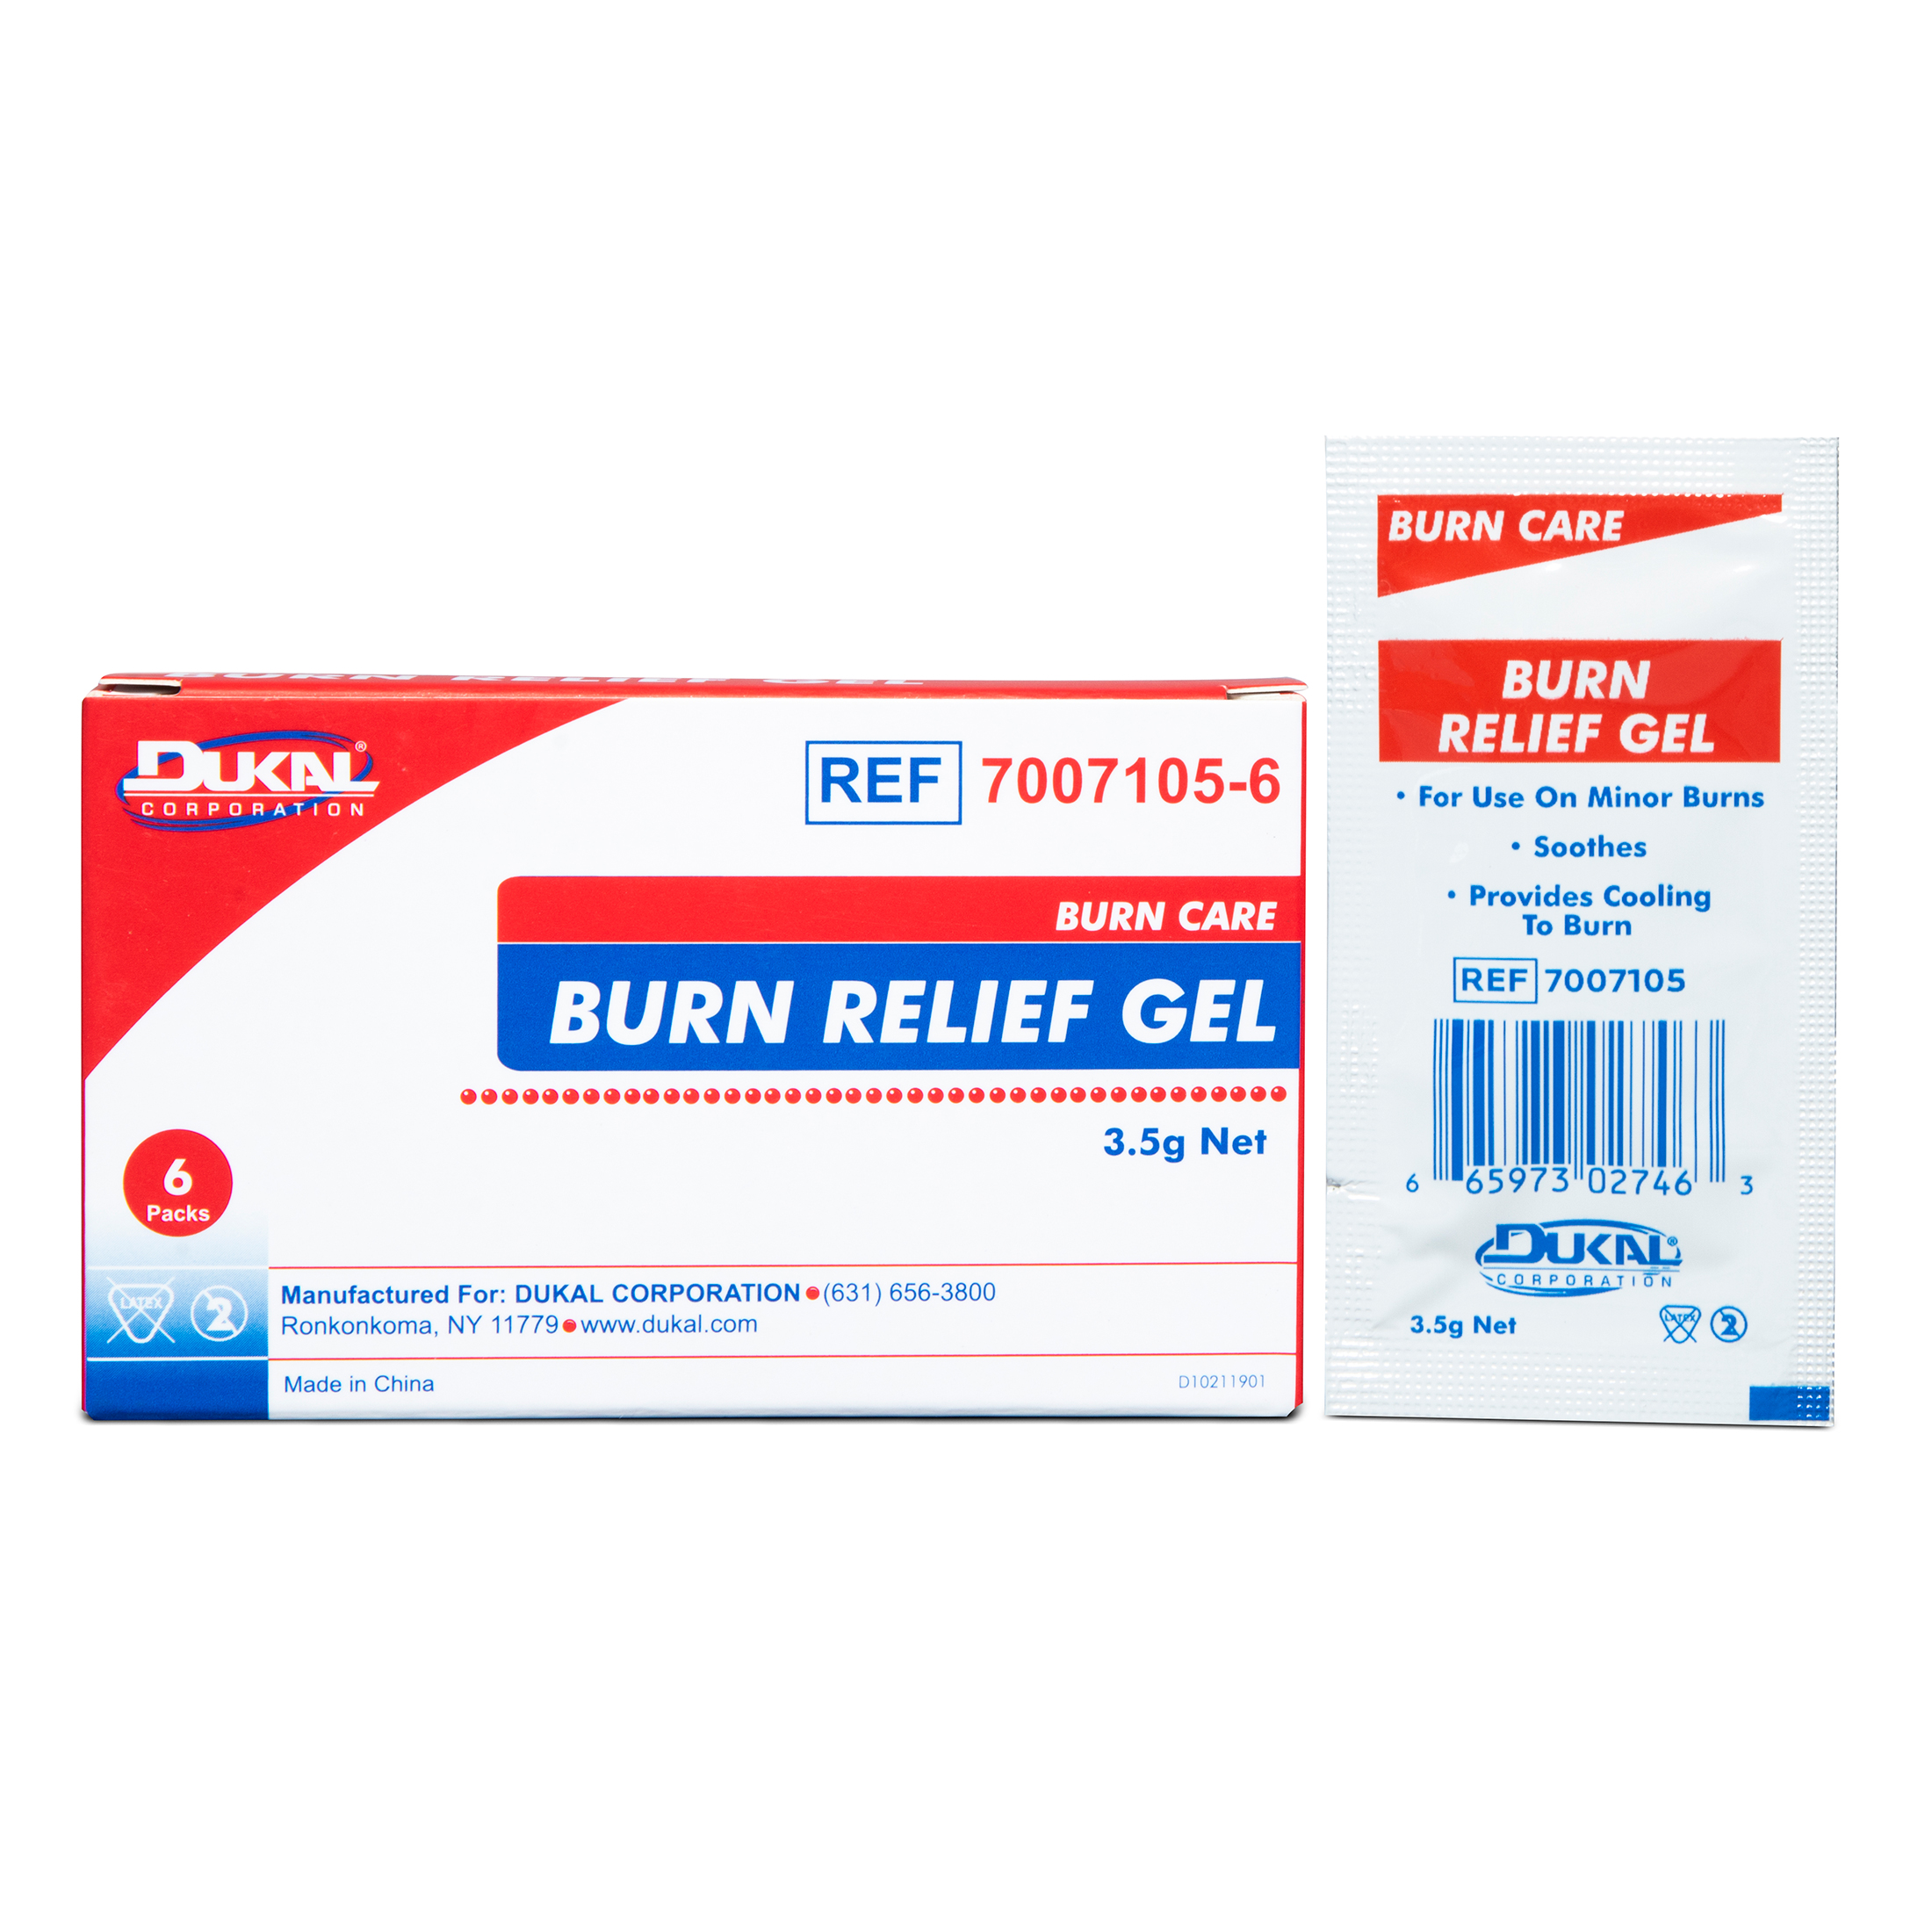 Burn Gel & Creams Products, Supplies and Equipment